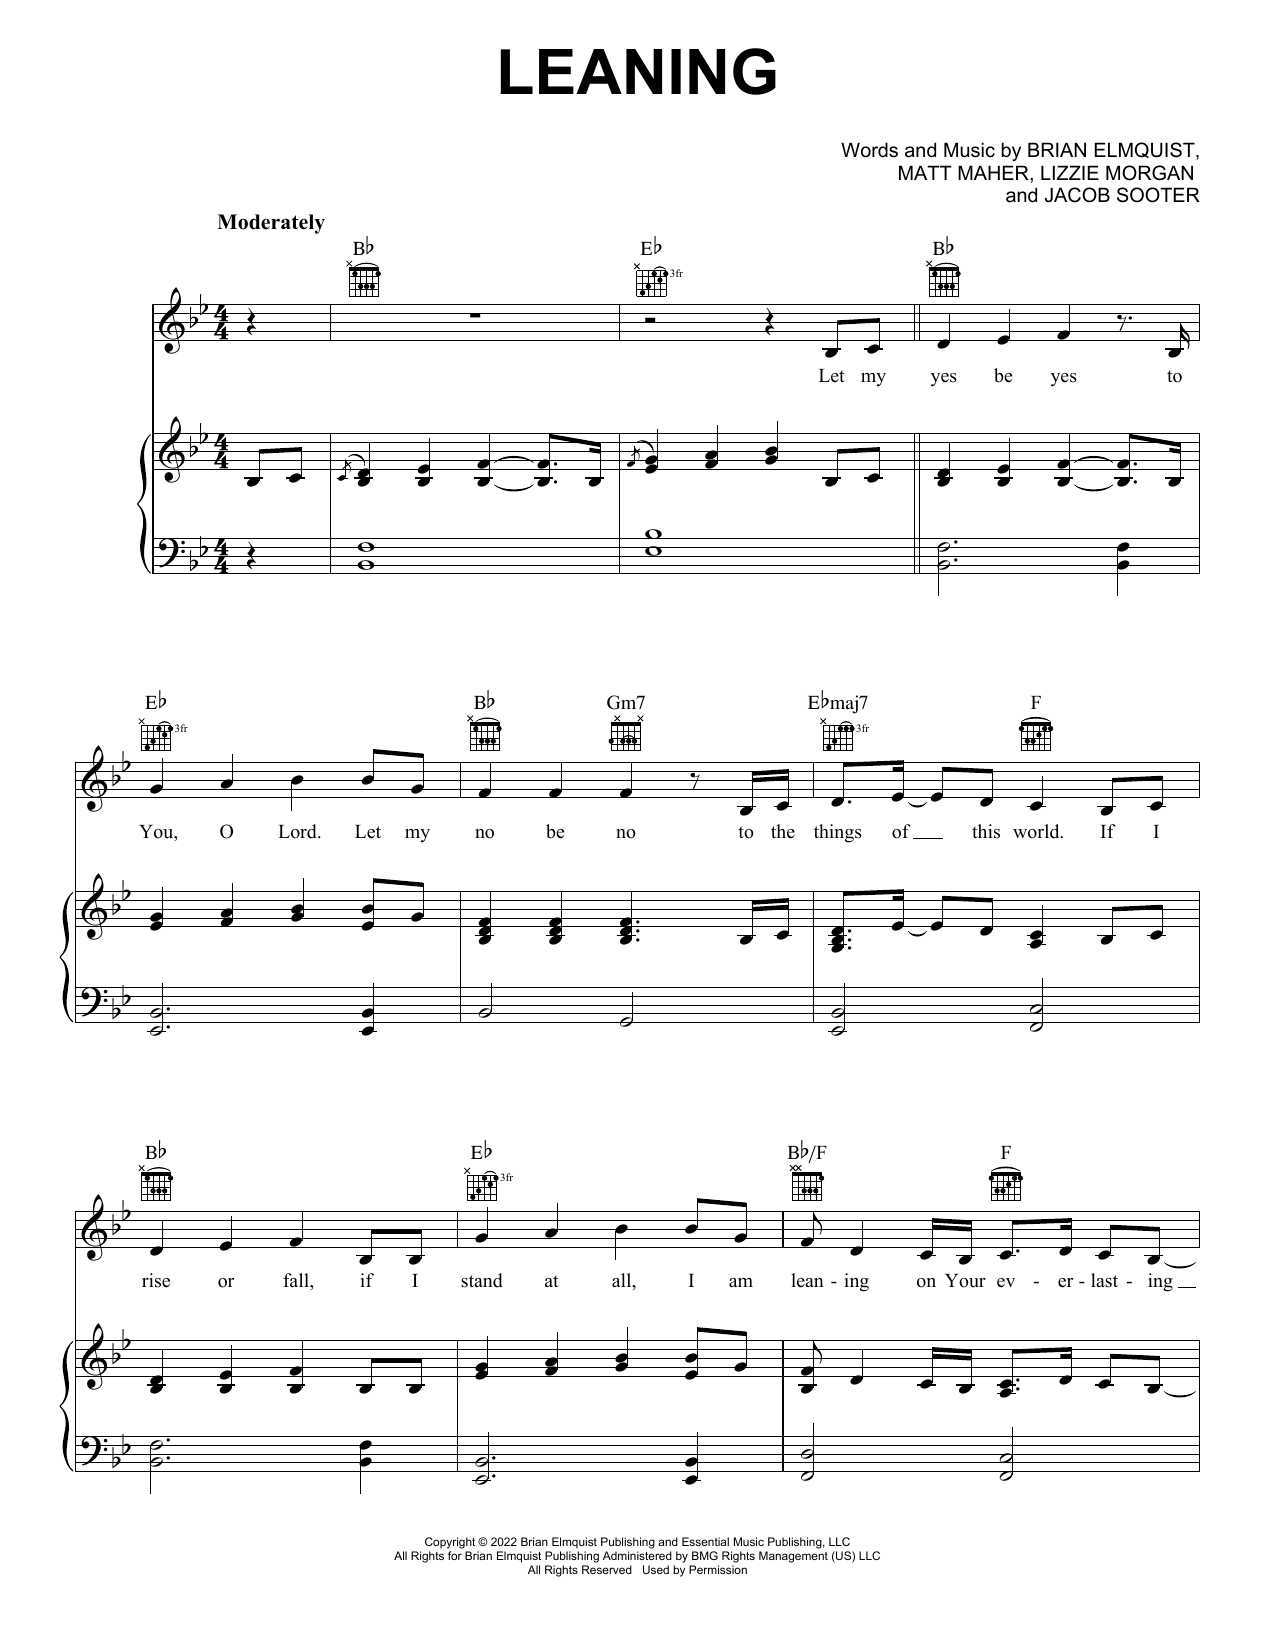 Matt Maher Leaning (feat. Lizzie Morgan) sheet music notes and chords. Download Printable PDF.